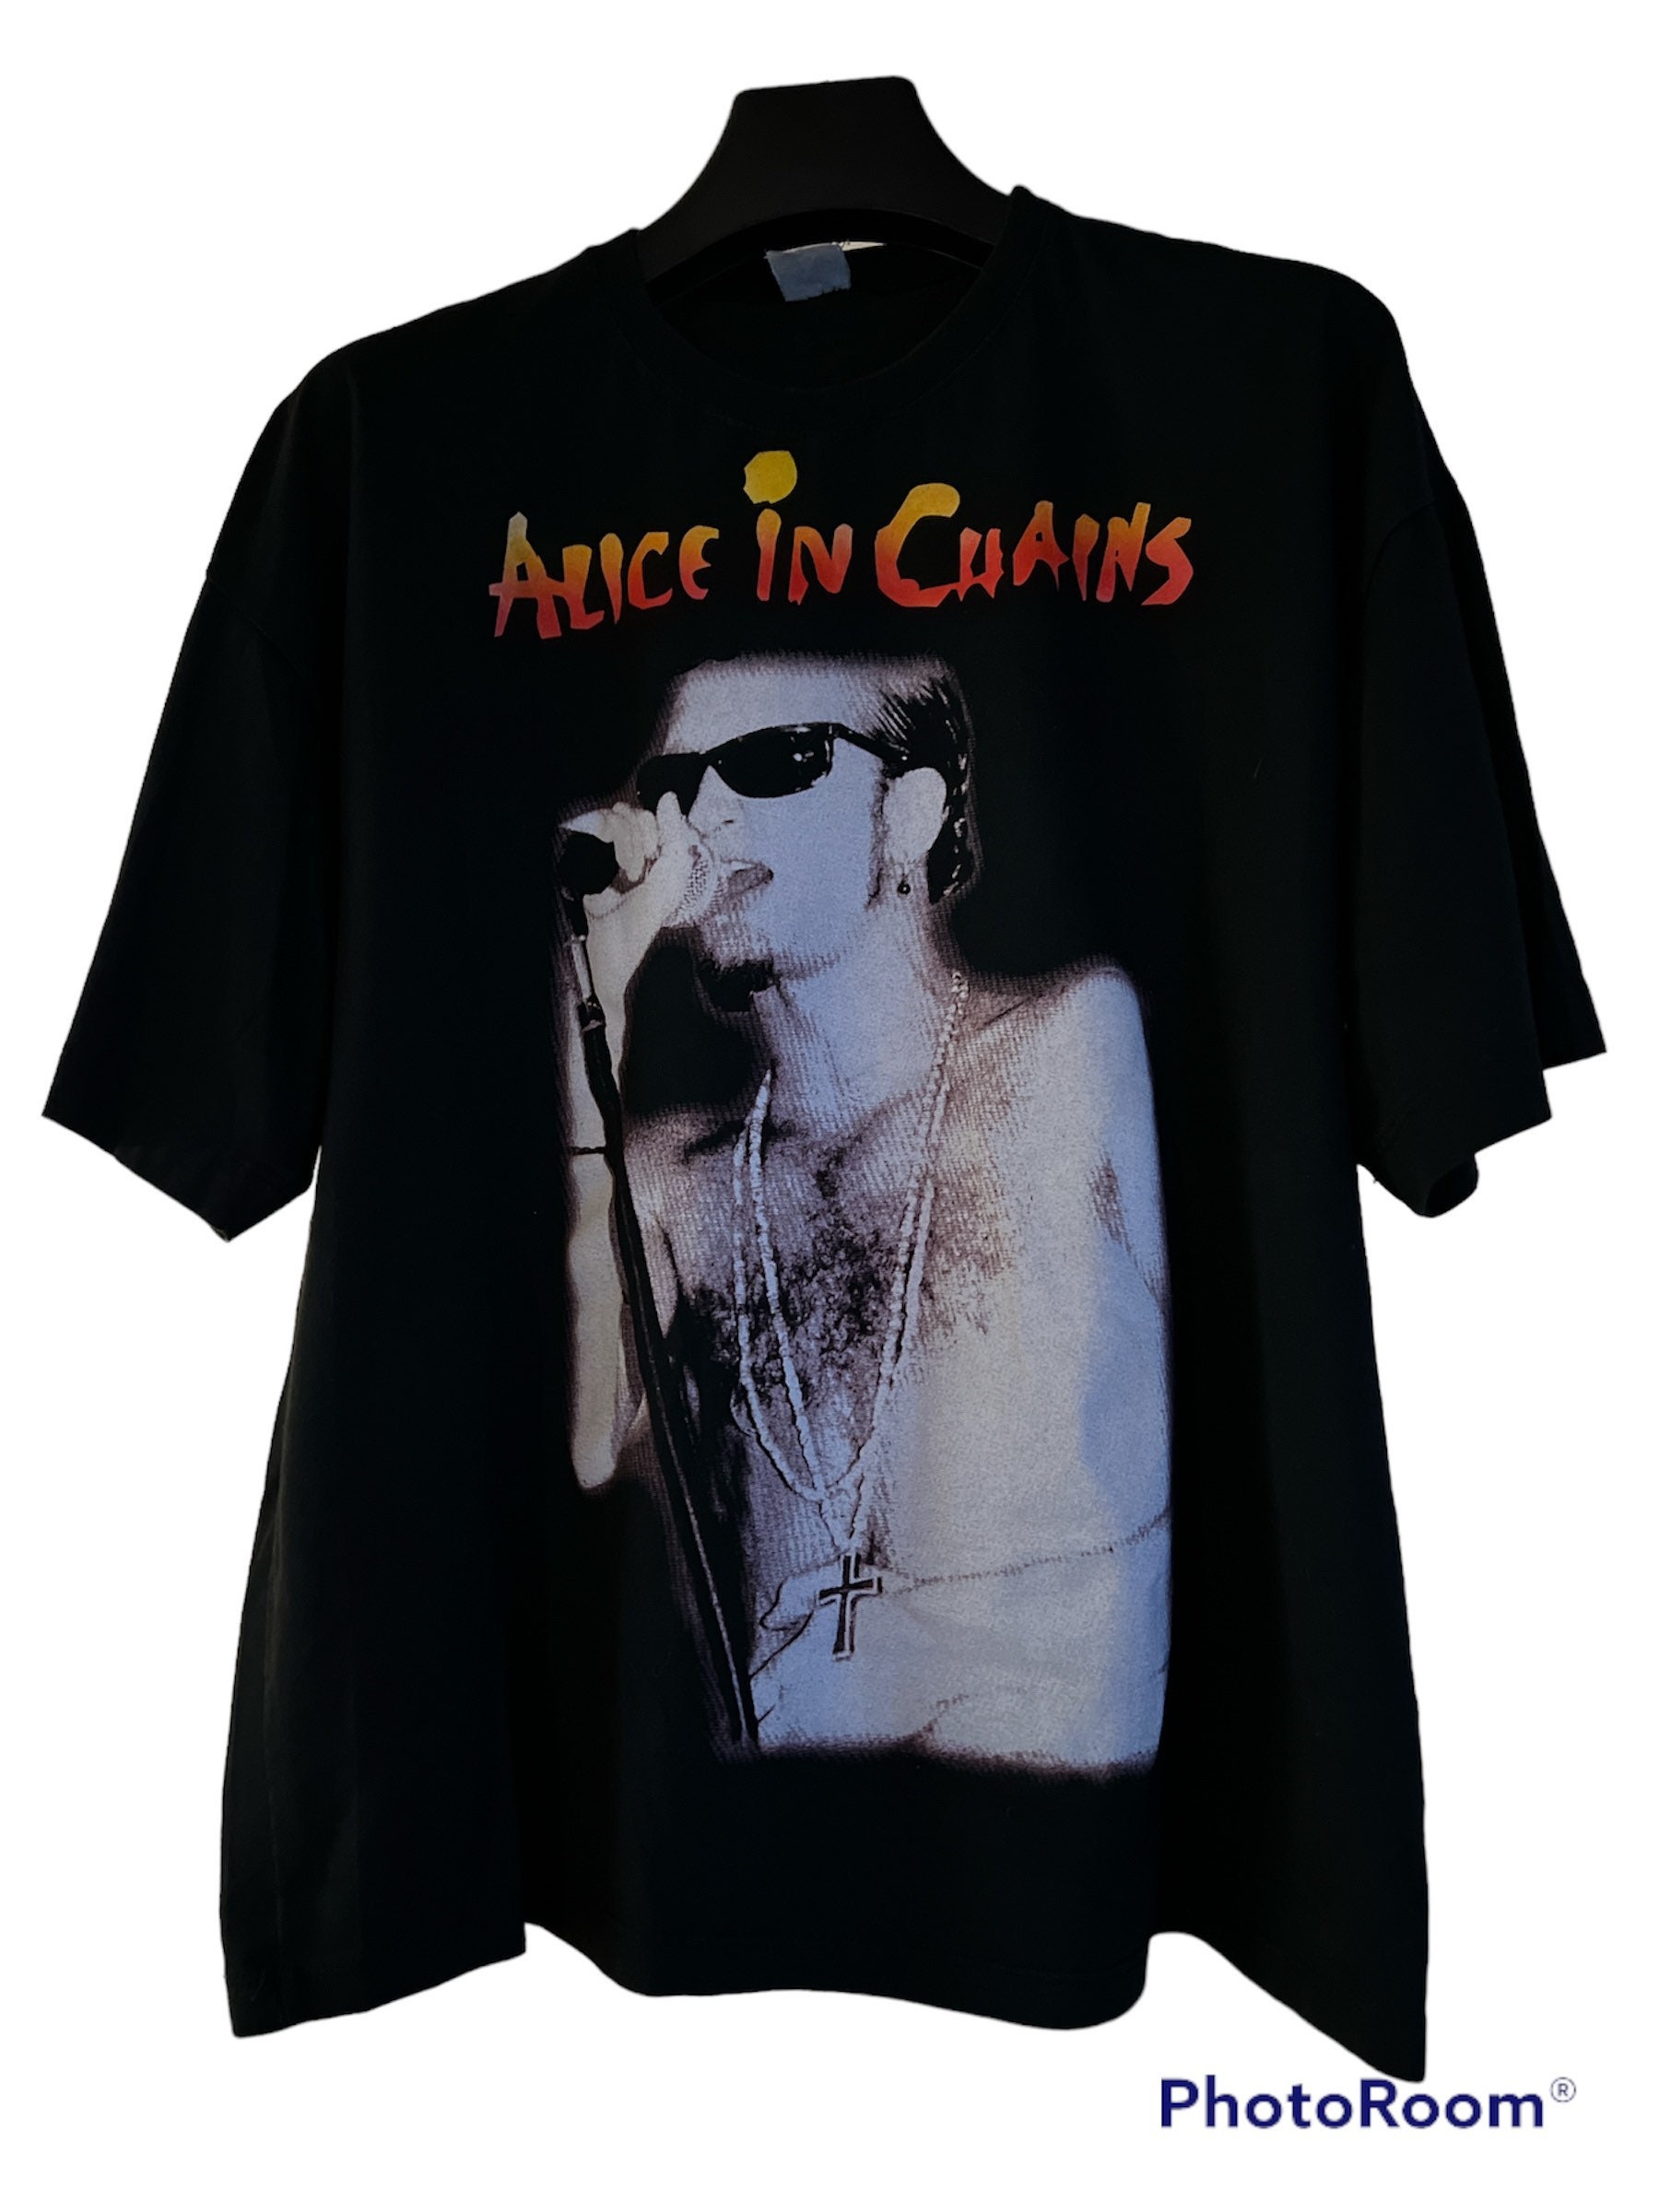 Layne Staley's Alice In Chains - One of my favorite AiC lyrics of all time!  What are yours?